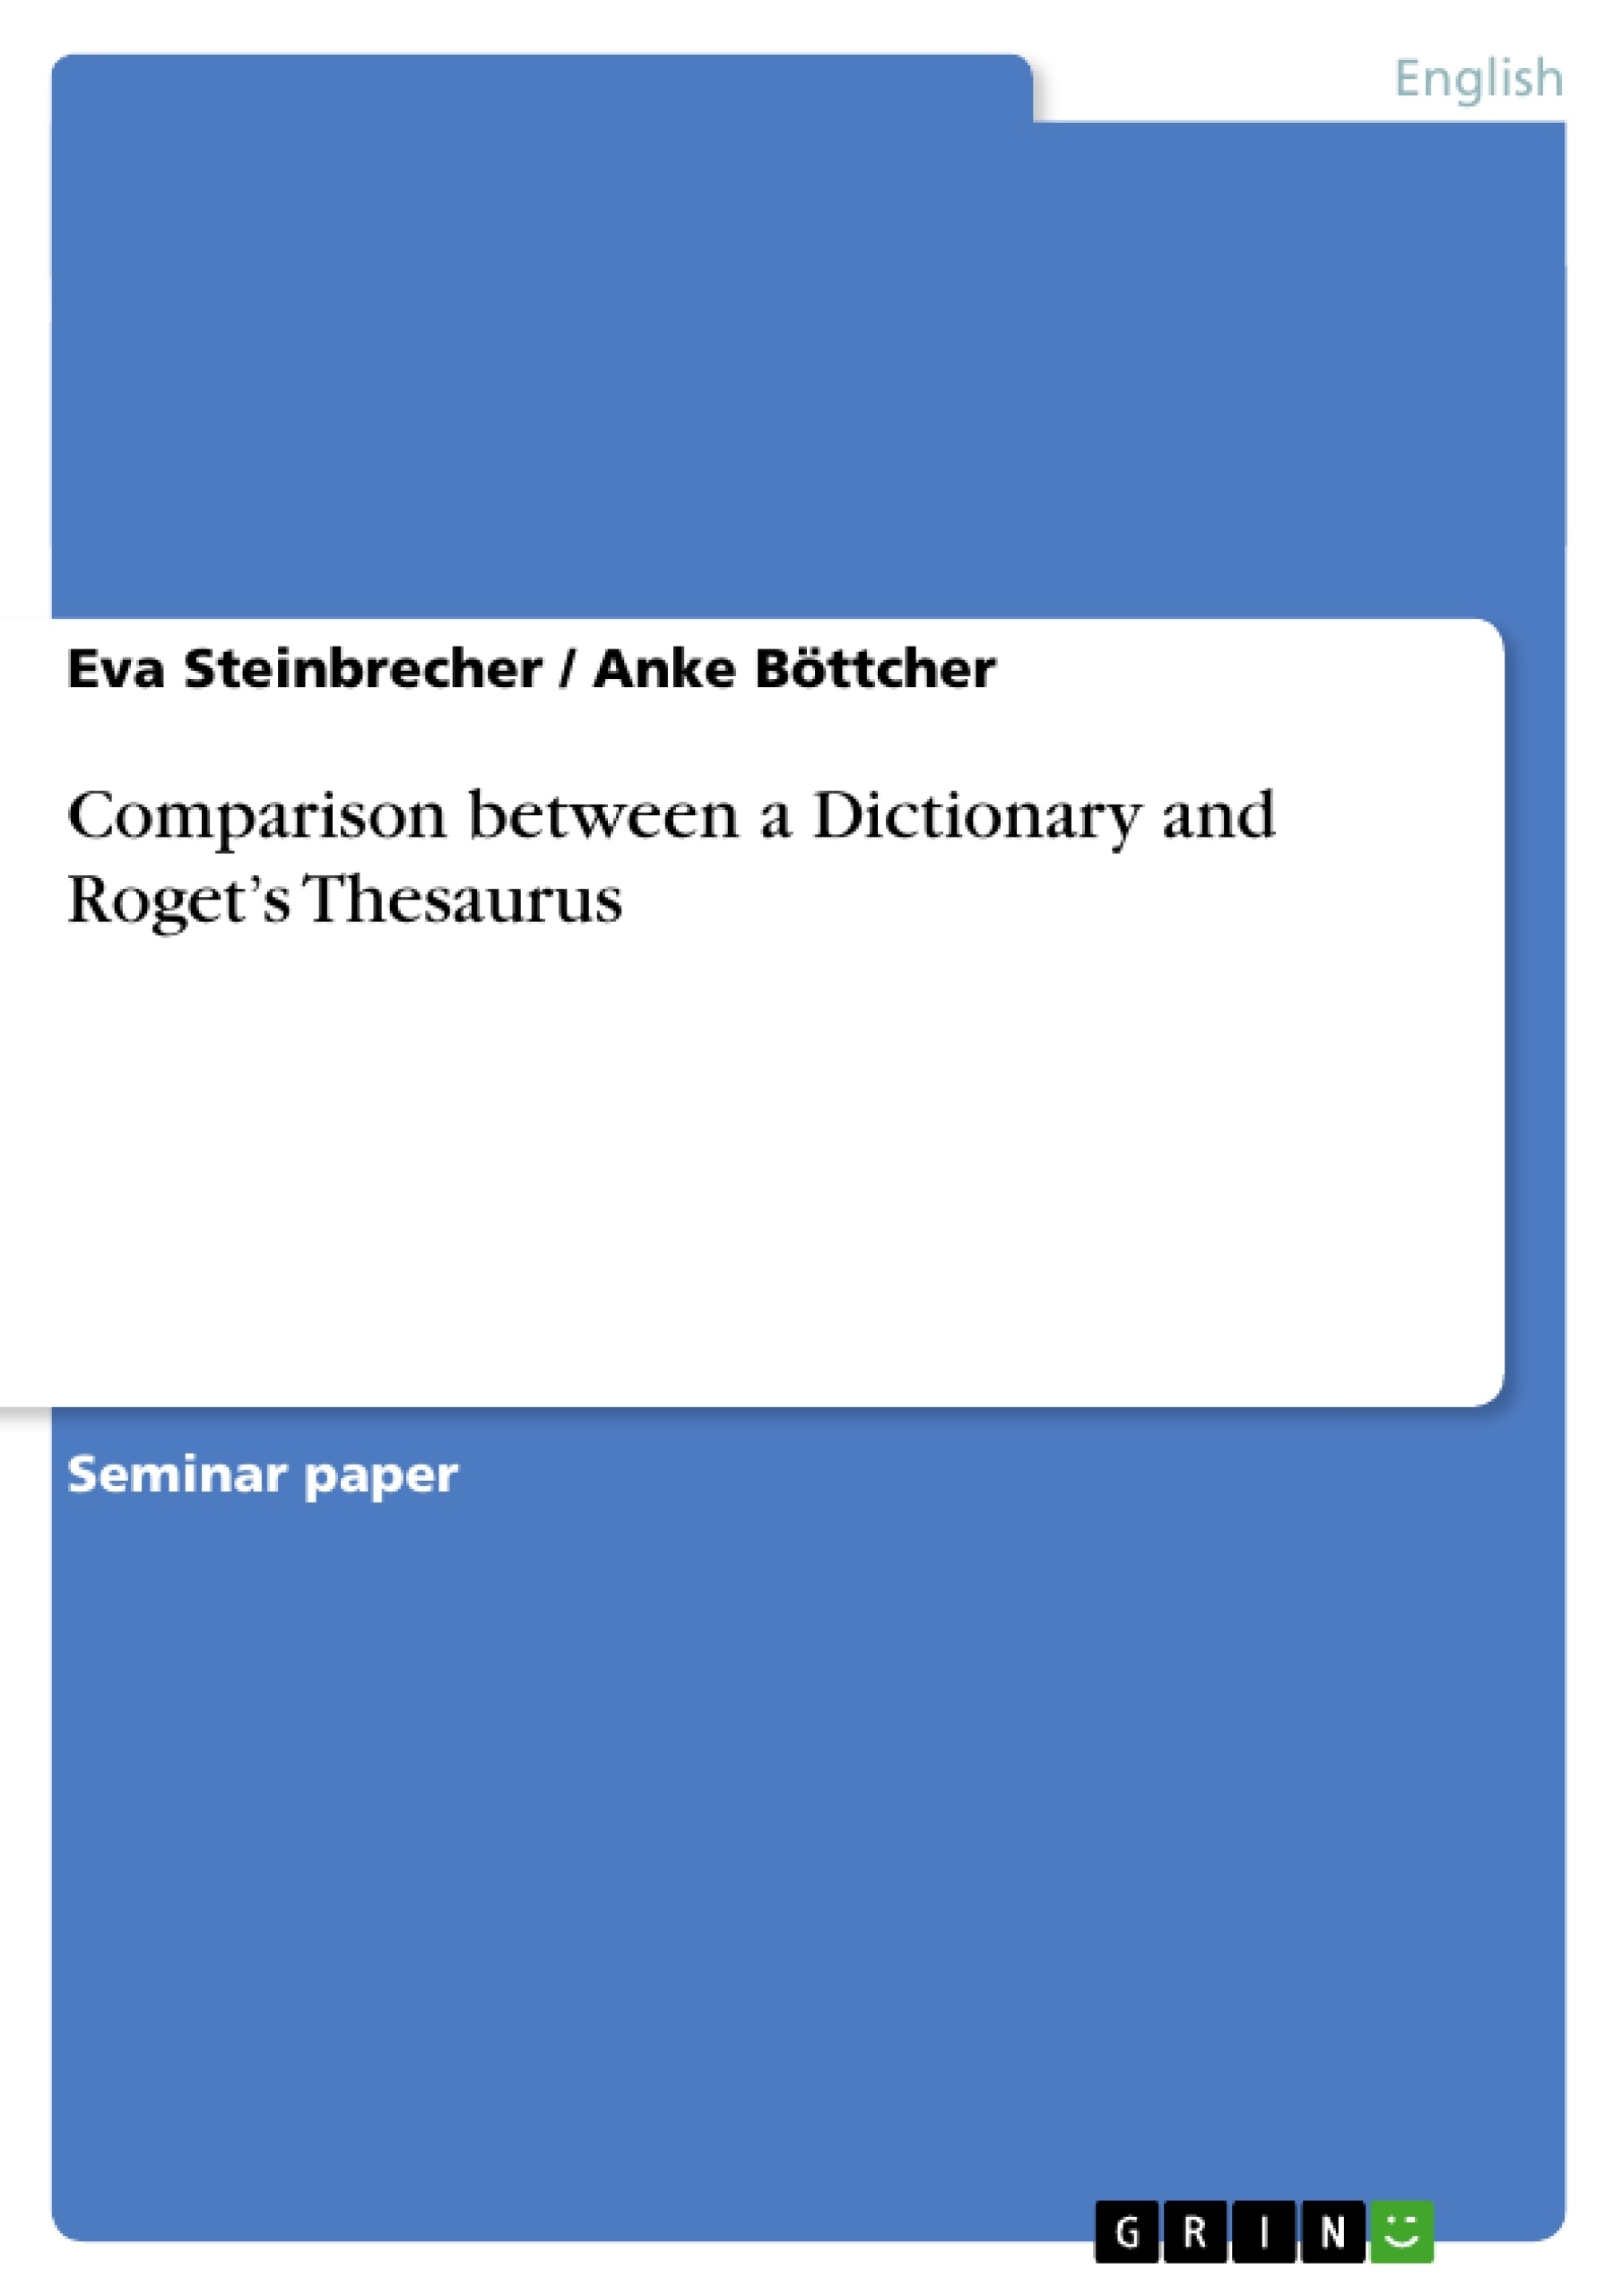 Title: Comparison between a Dictionary and Roget’s Thesaurus